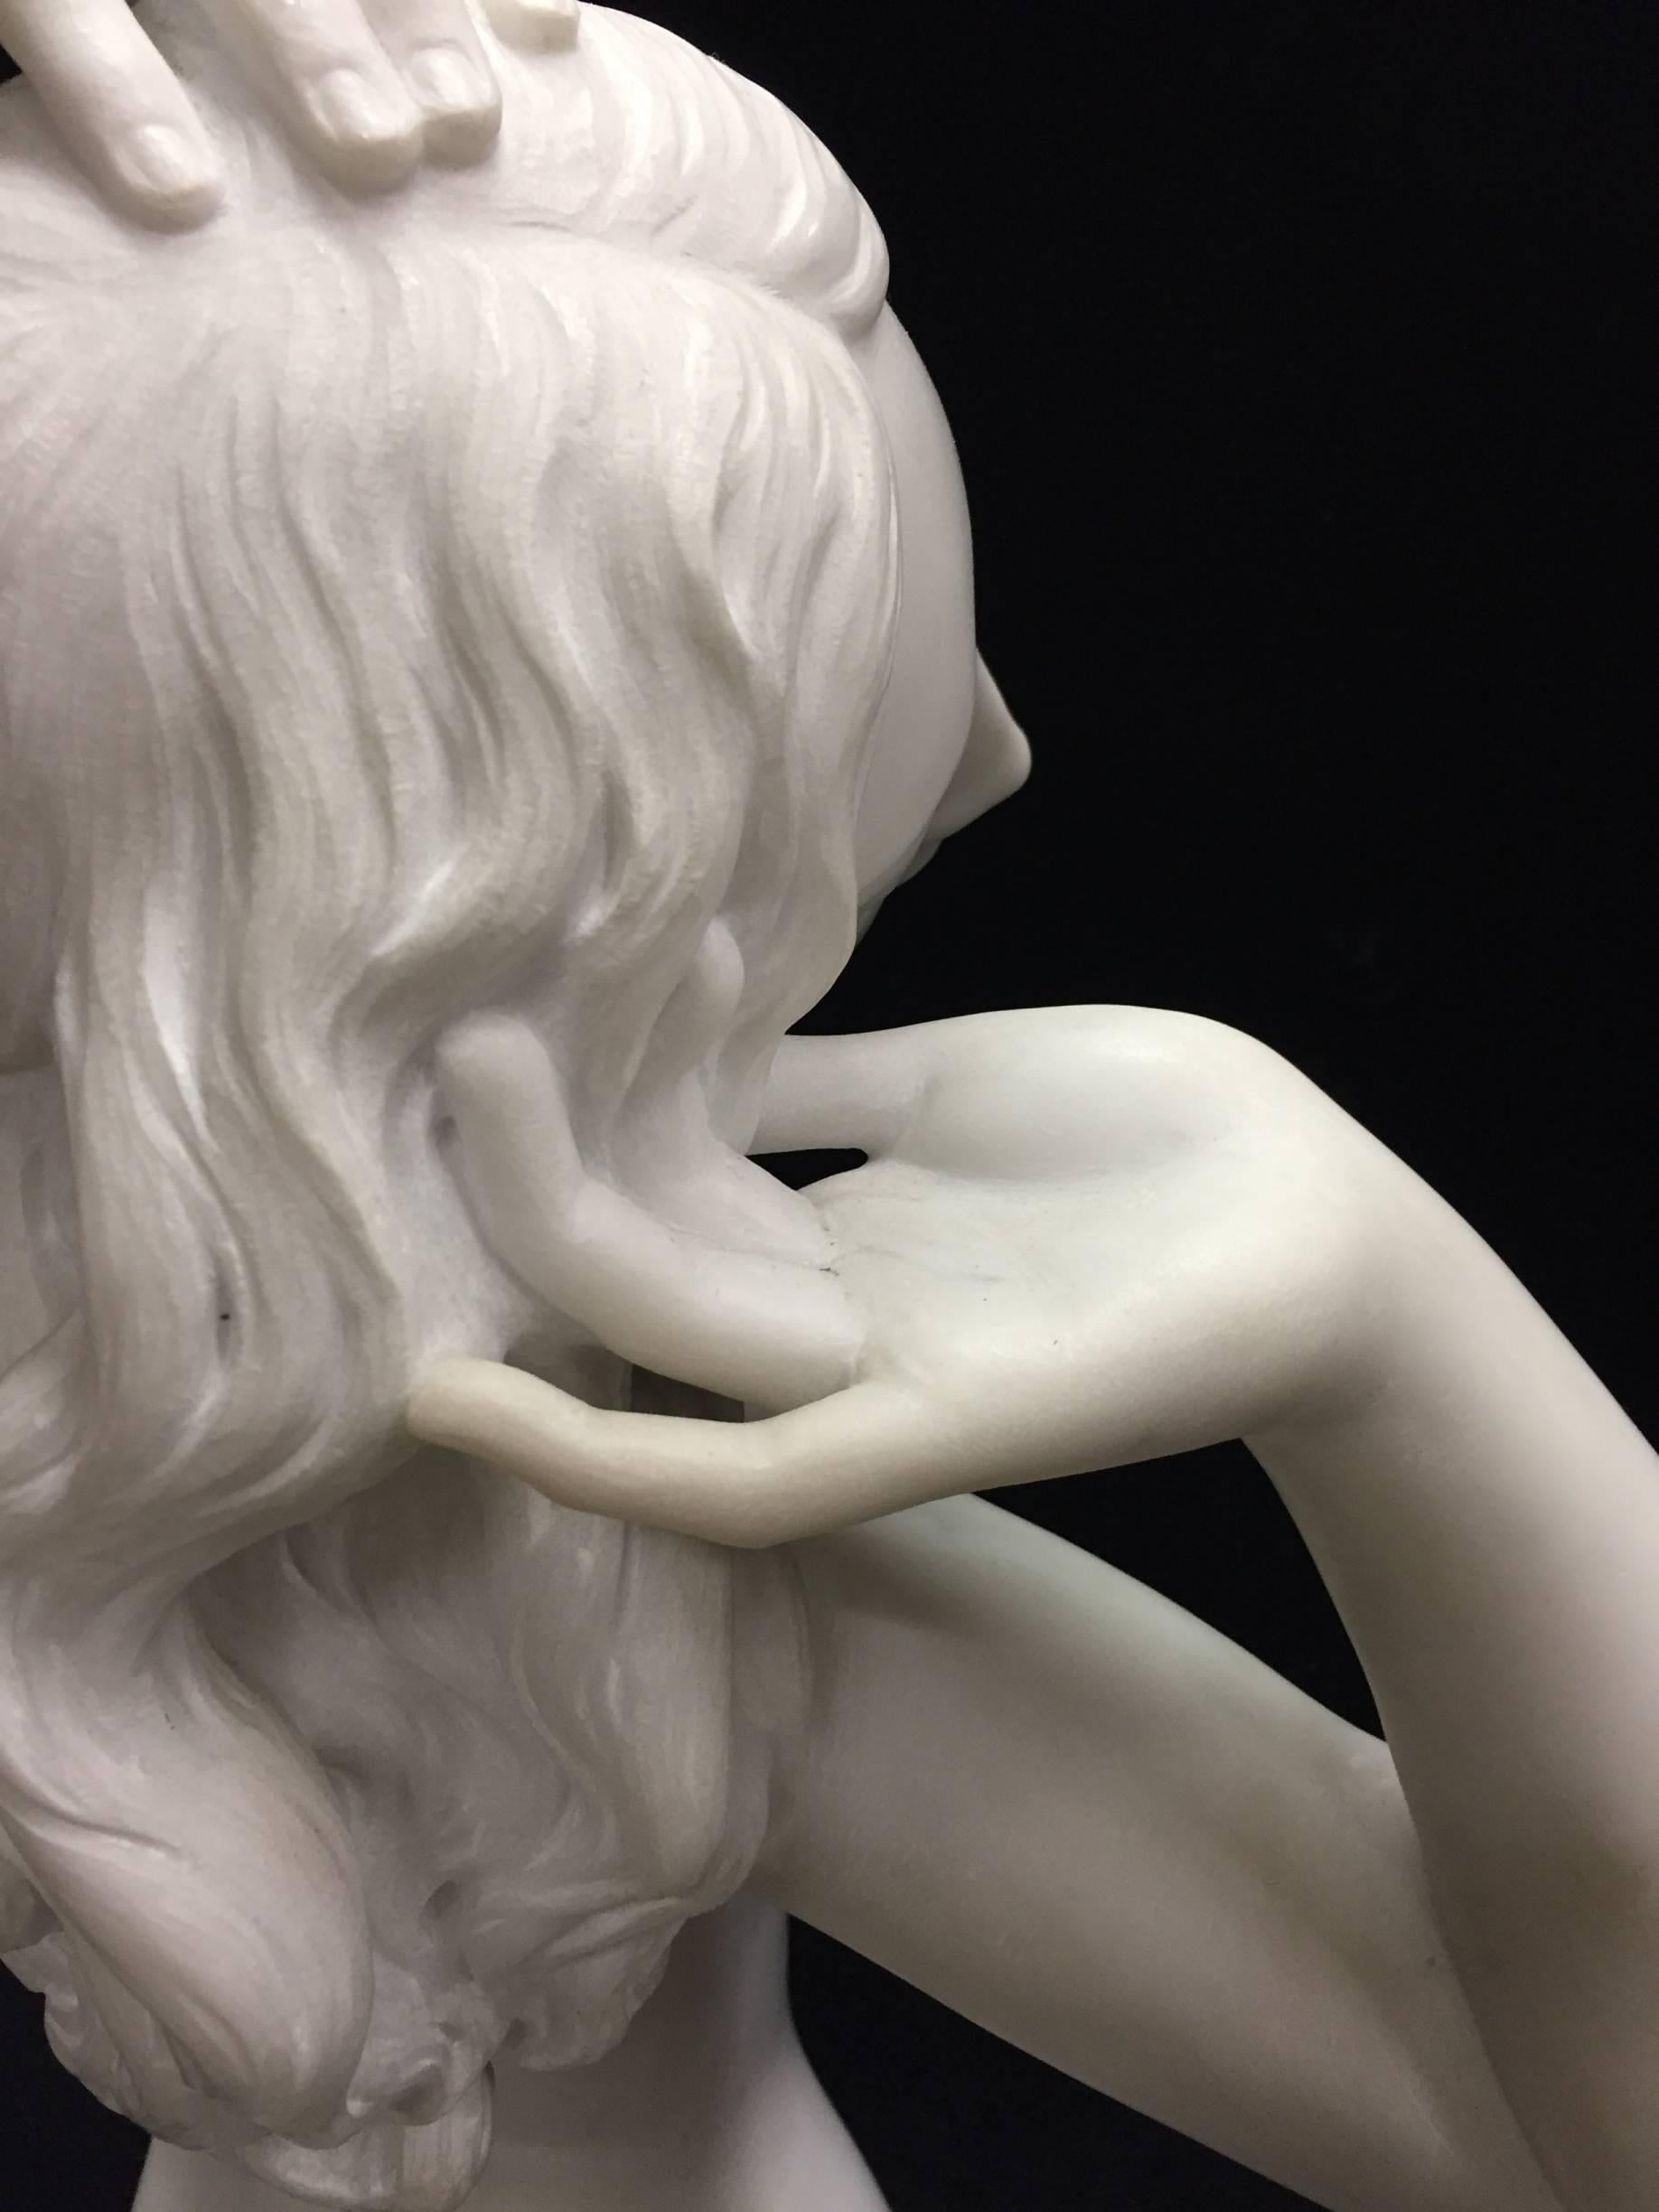 Hand-Carved Italian Carved White Marble Nude Figure in an Ocean Wave